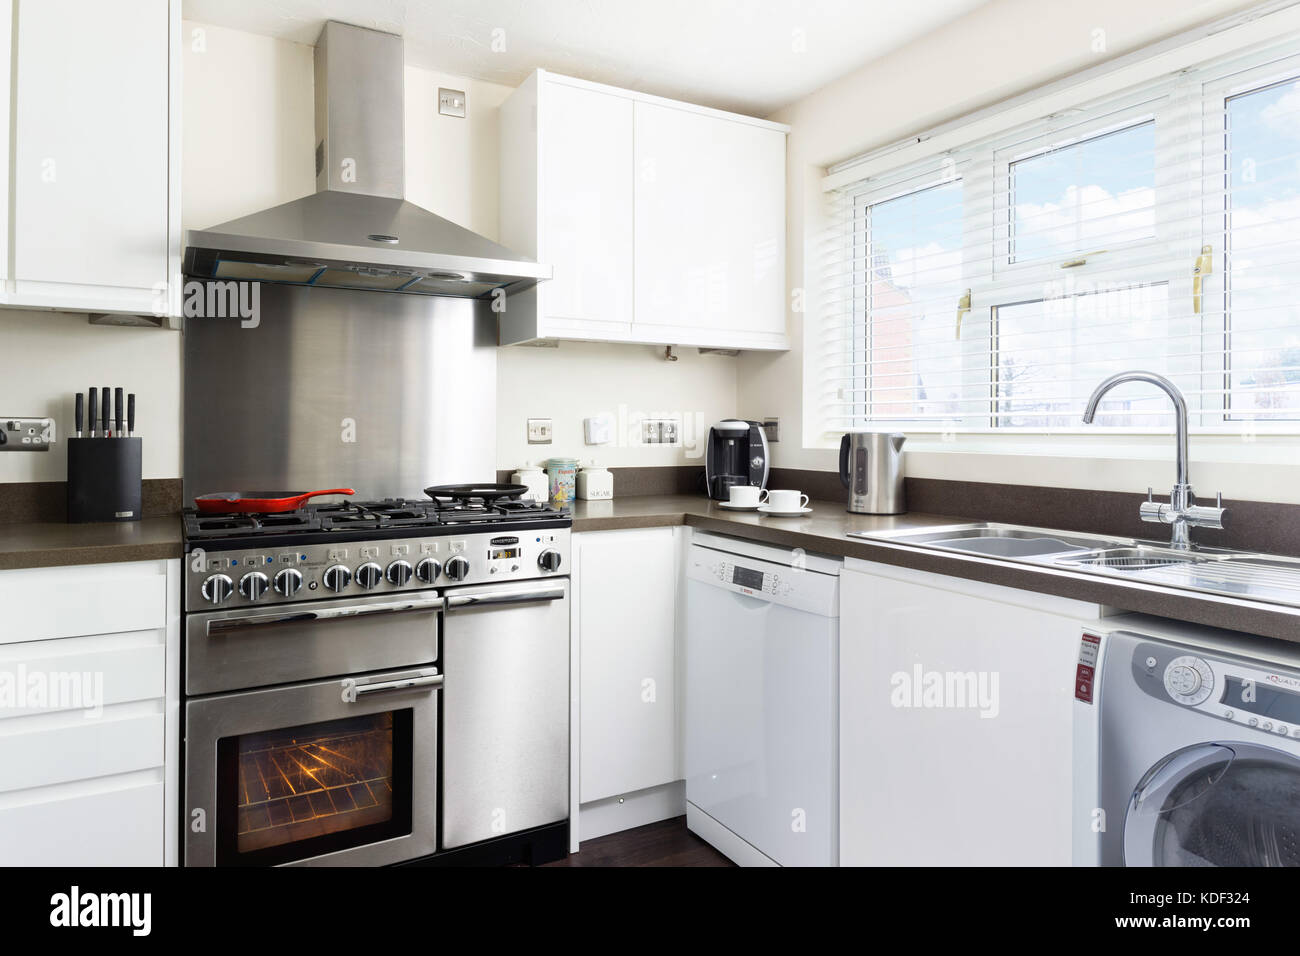 A small, clean, fresh, white kitchen with stainless steel range cooker, back splash & hood in a typical modern UK home. Stock Photo